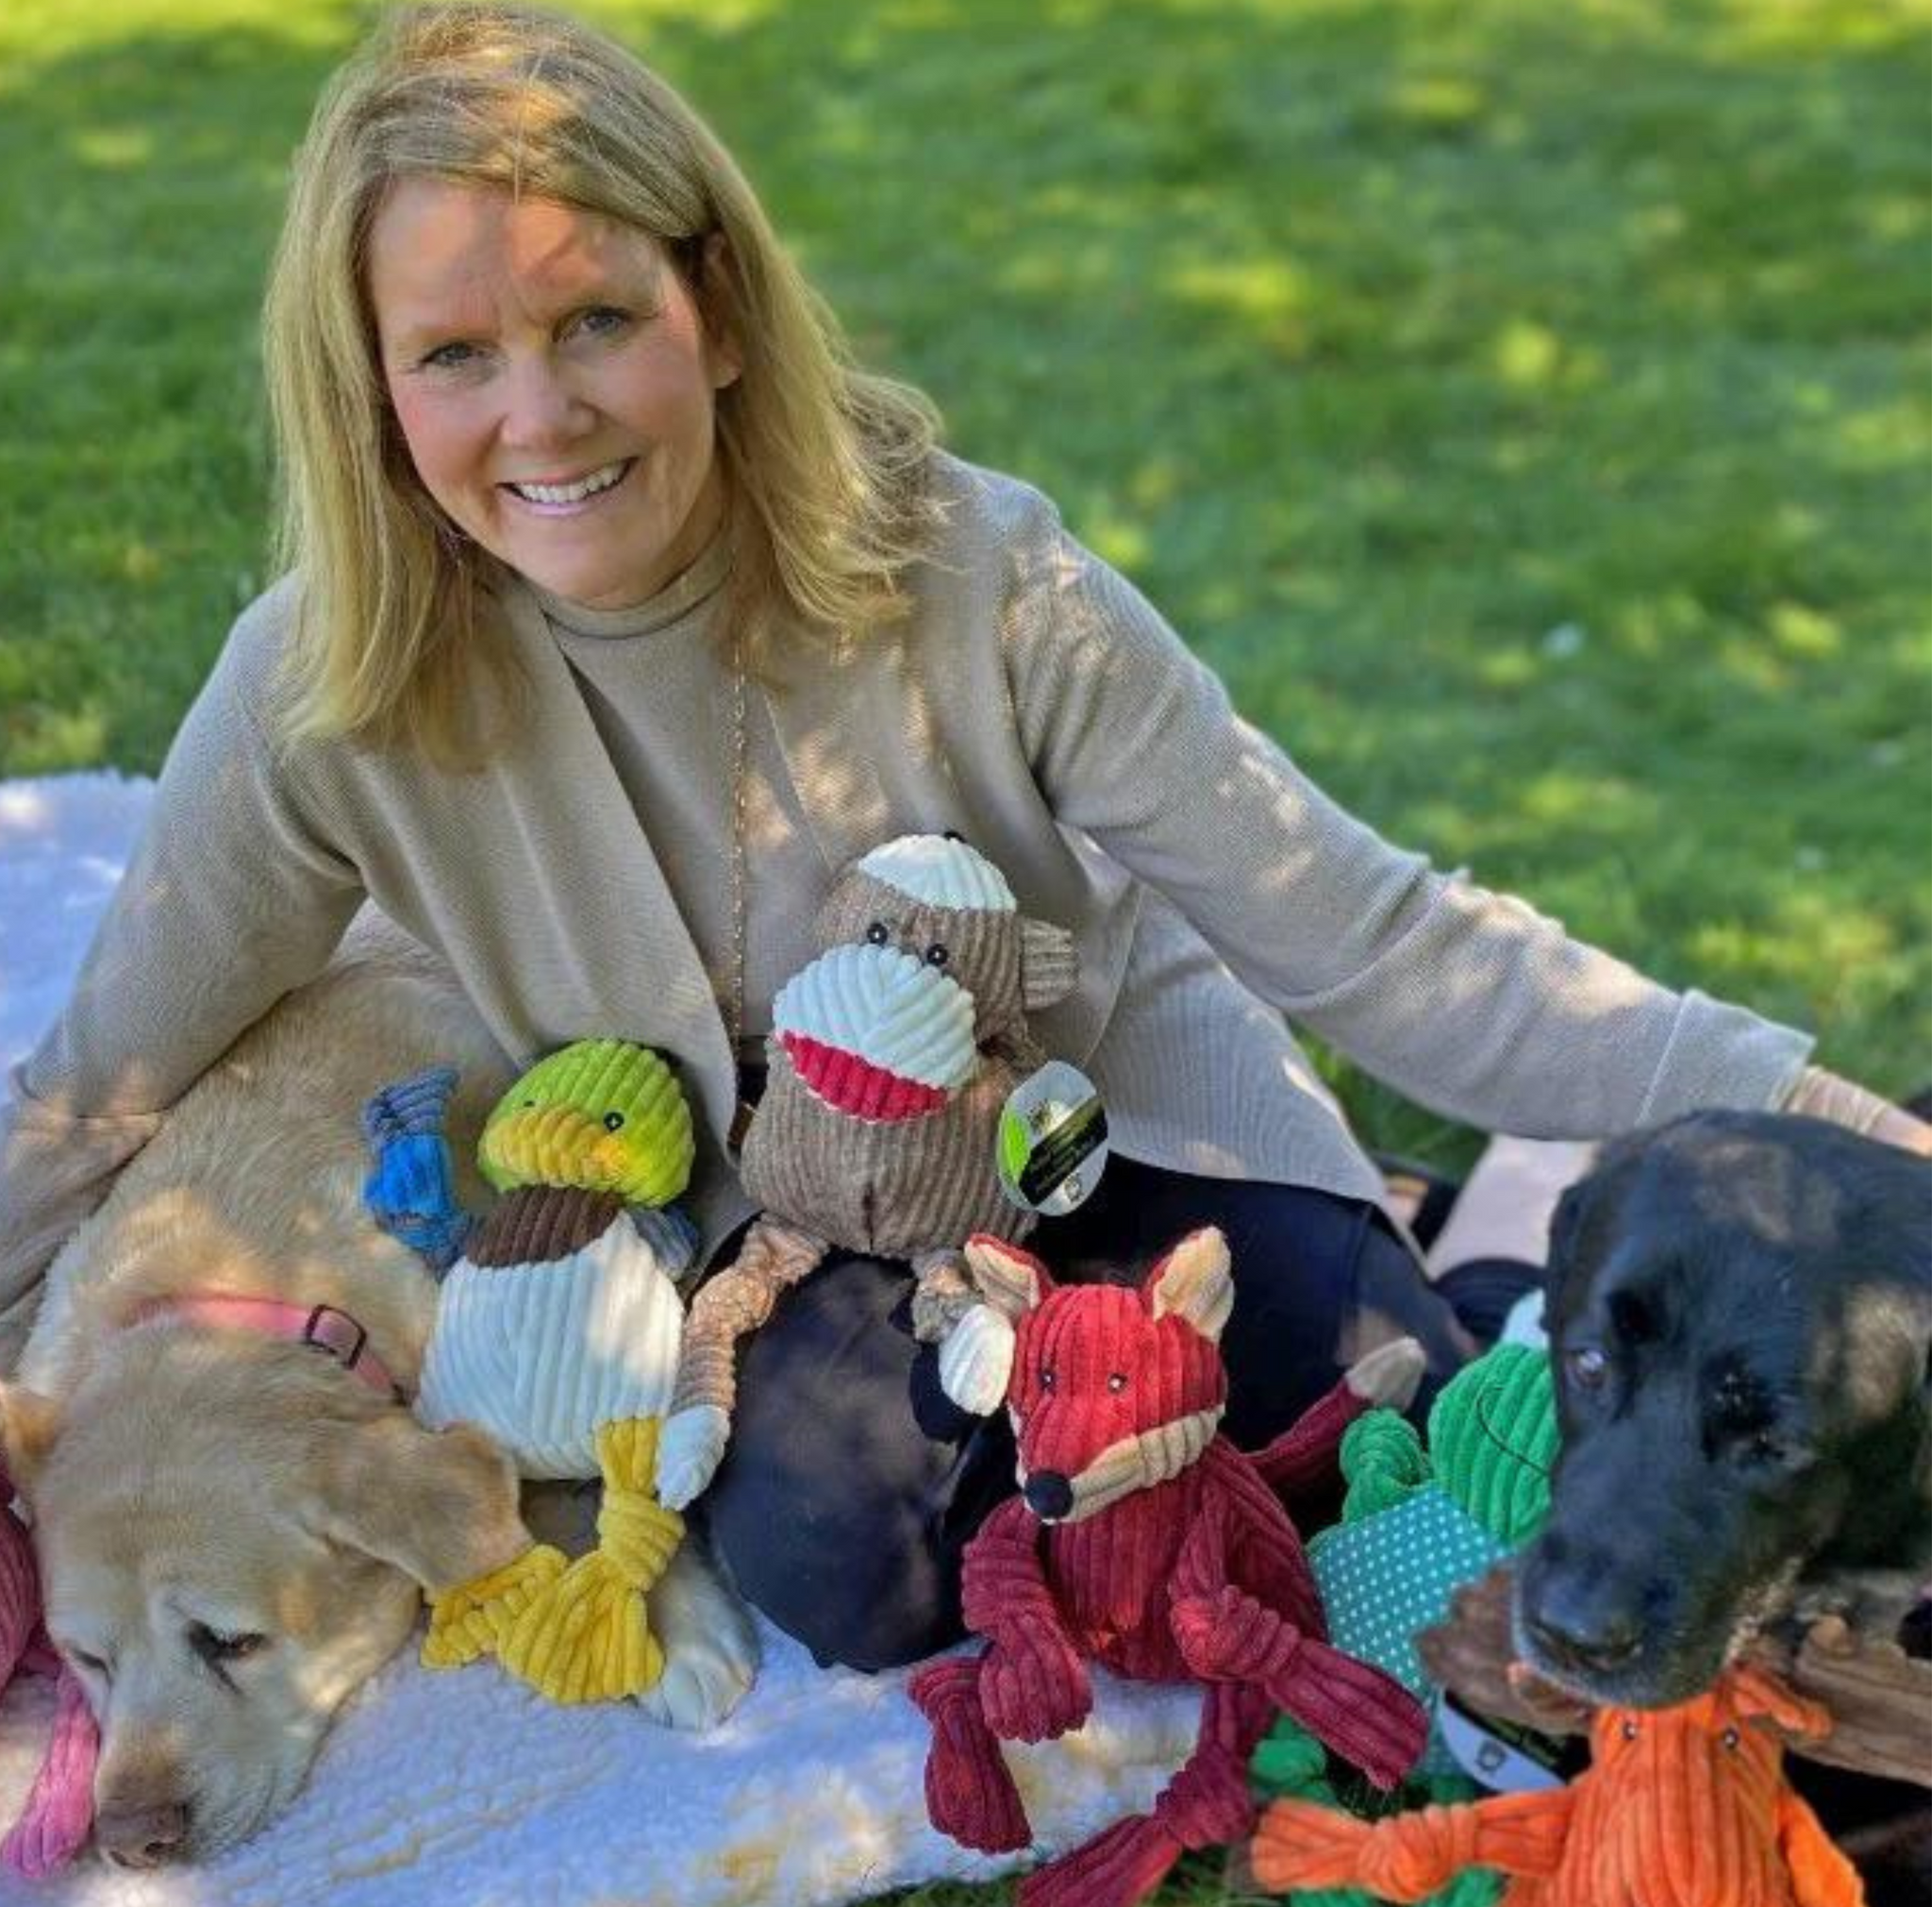 Julie Krauss, Managing Partner & Co-Founder, posed with Knottie® plush toys, and two dogs yellow lab Bridget and black lab Scout